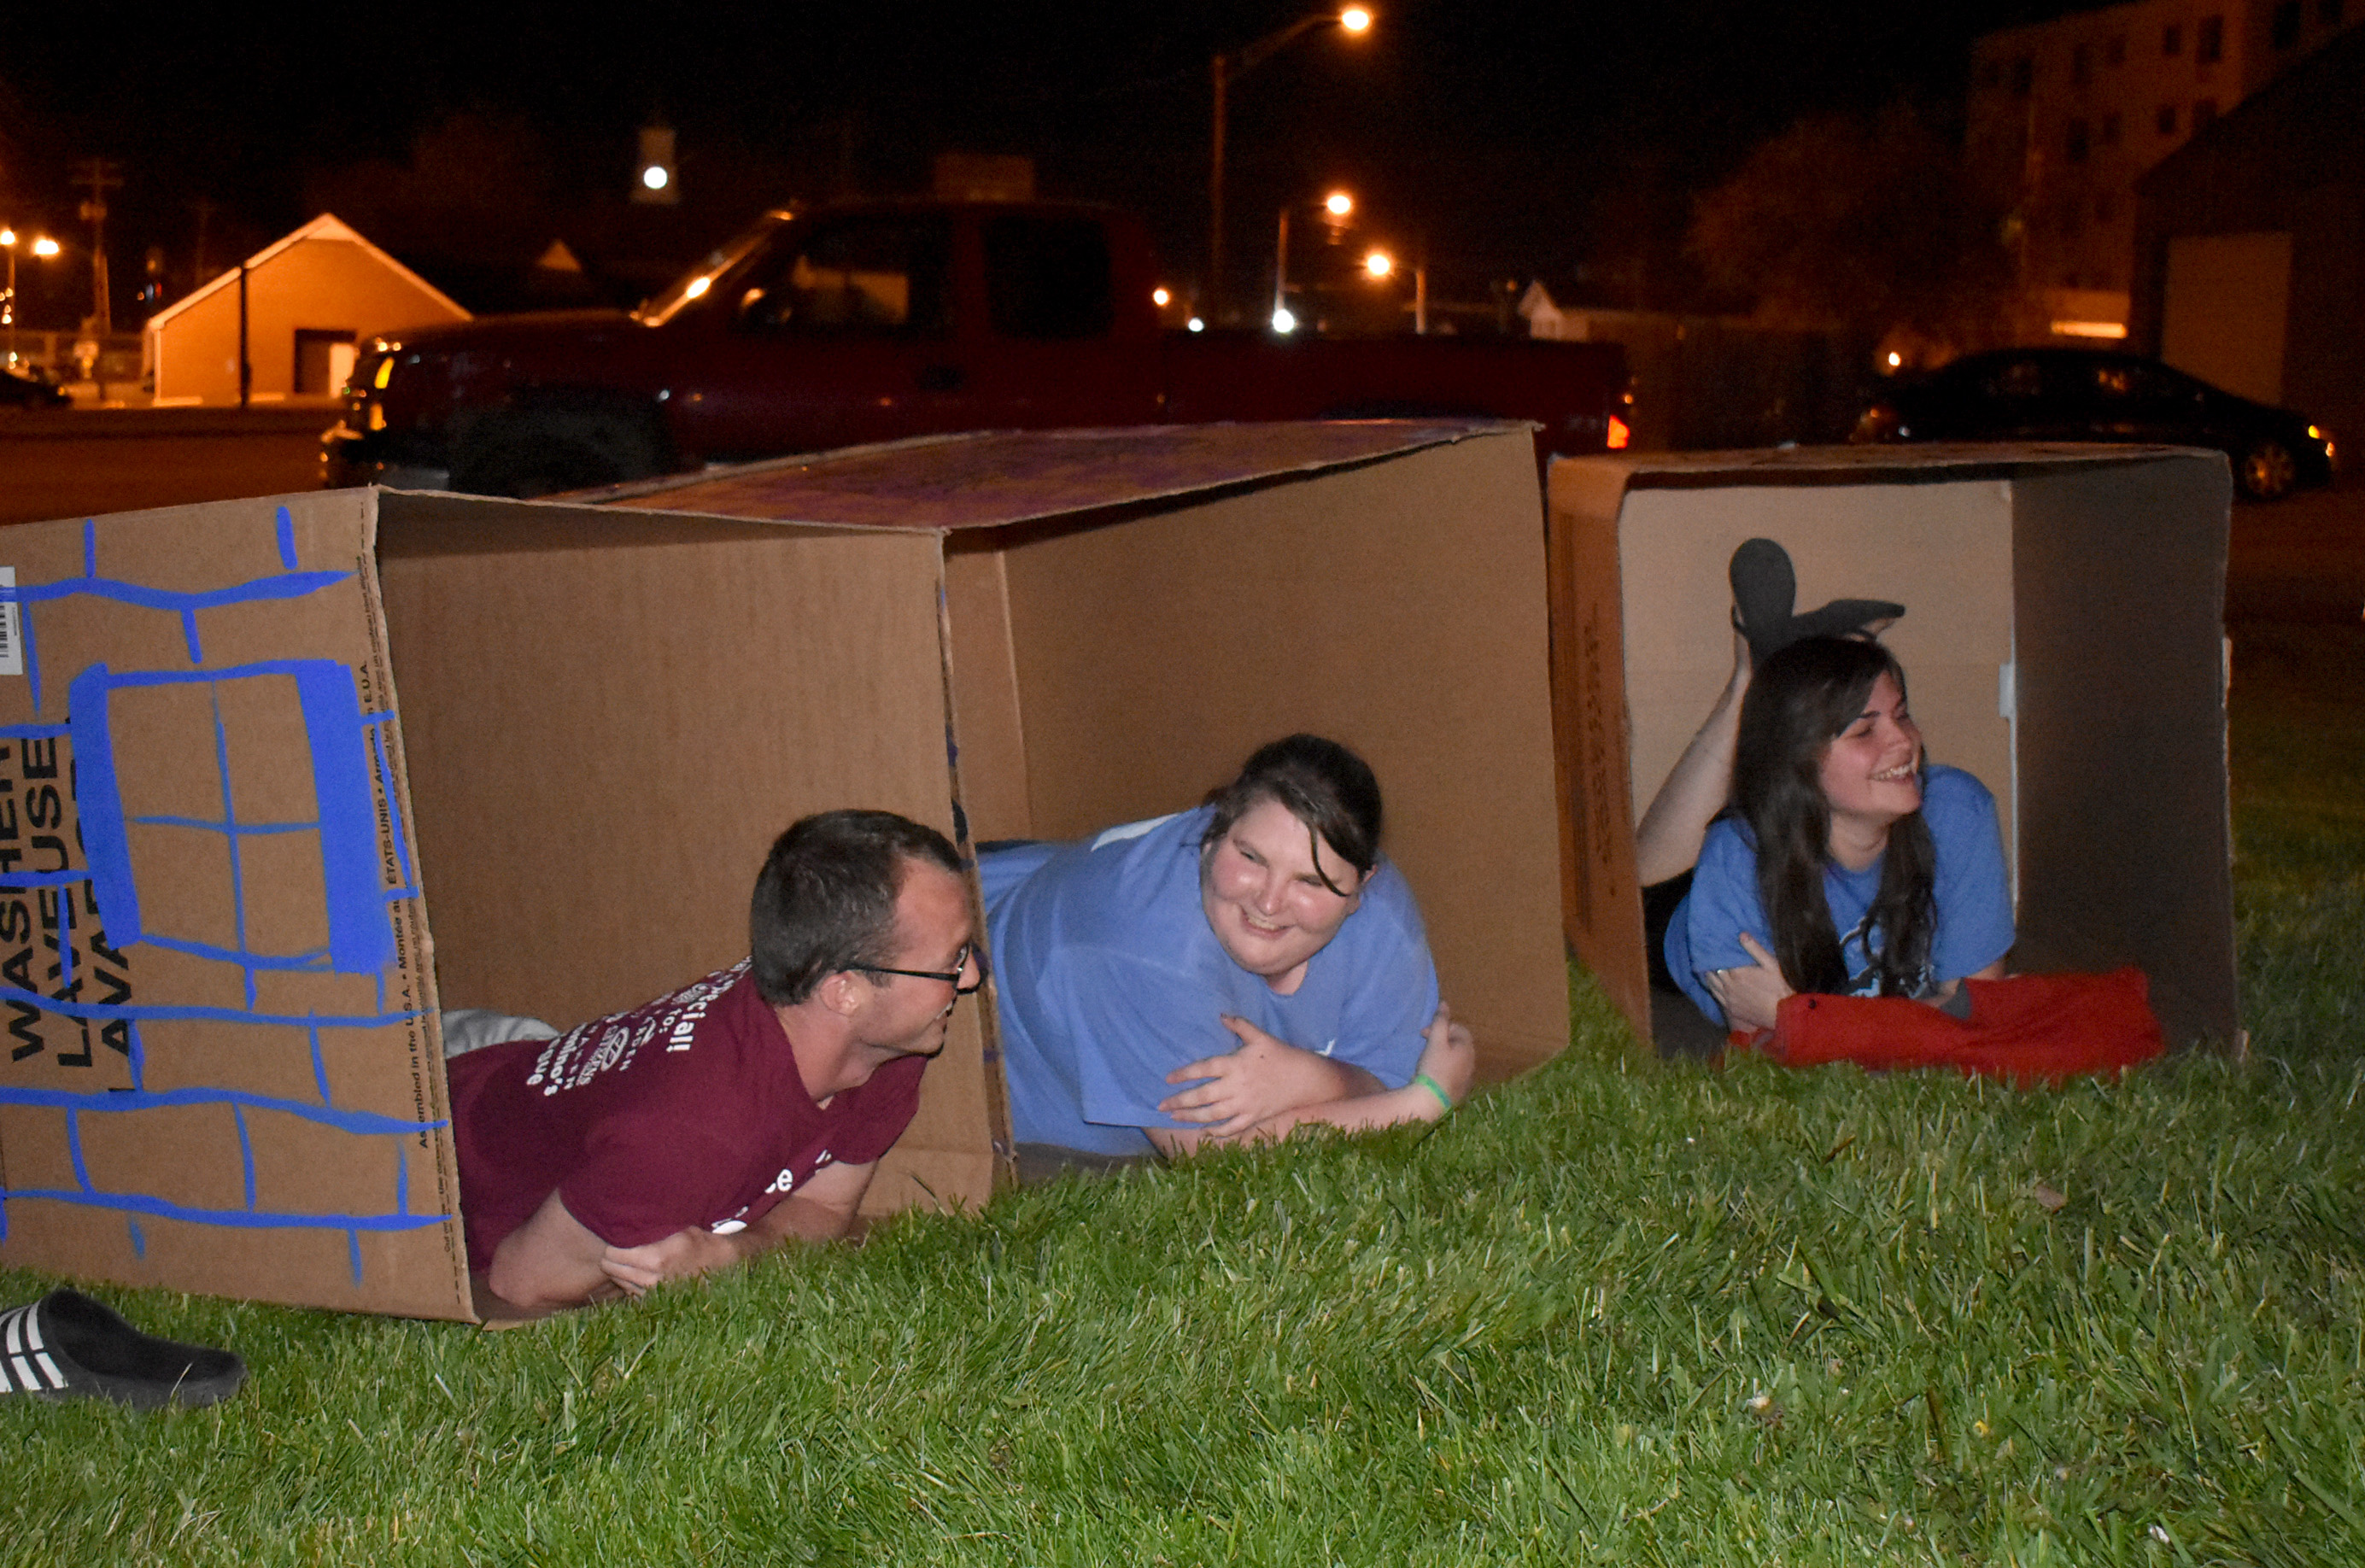 From left, Campbellsville University students Austin Tucker, Kendra Polston and Christy Ingram settle in their cardboard boxes for Cardboard Nation. (CU Photo by Alexandria Swanger)